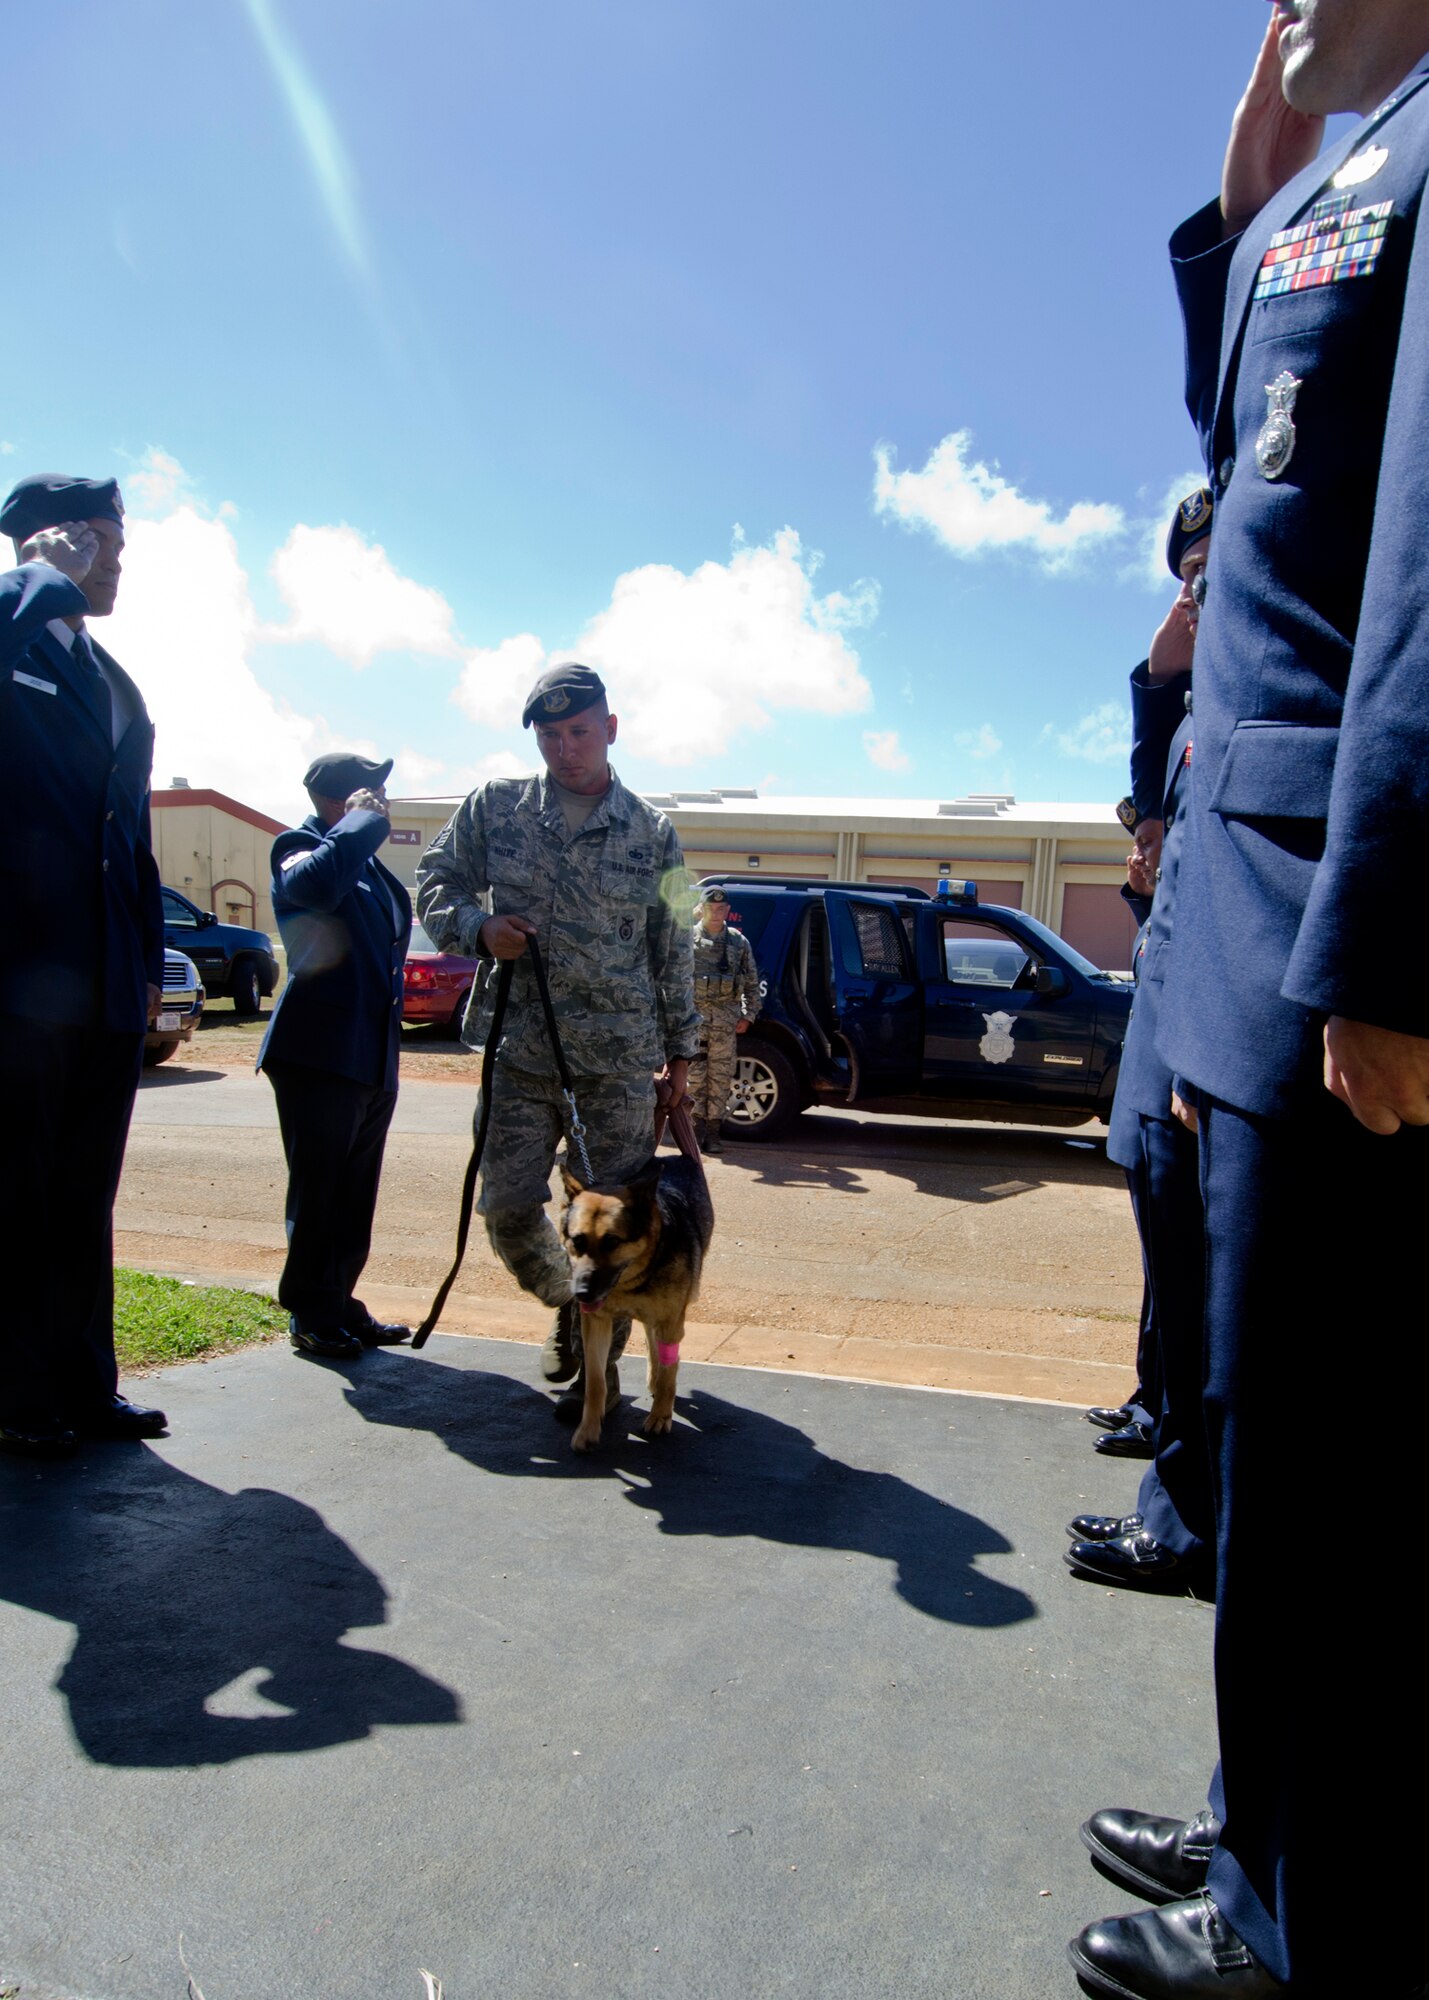 36th Security Forces Squadron military working dog handlers salute as Staff Sgt. Terry White leads Ariet, a military working dog, into the vet clinic May 15, 2014, on Andersen Air Force Base, Guam. The squadron performed military honors for Ariet before she was put to rest for medical reasons. (U.S. Air Force photo by Senior Airman Katrina M. Brisbin/Released)